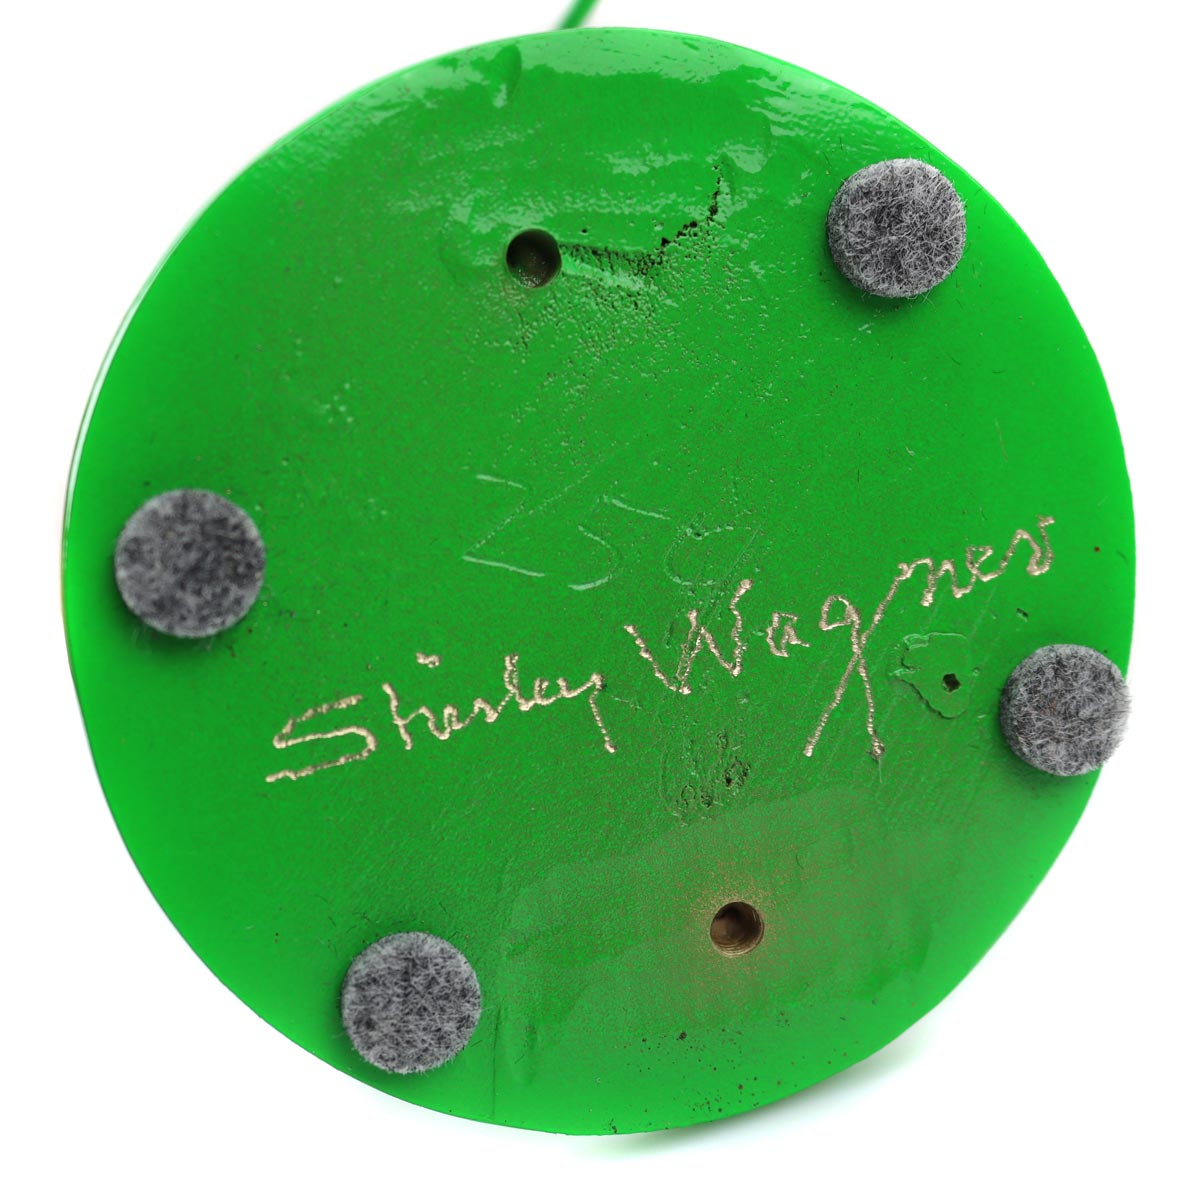 Shirley Wagner - "Pure (Male Green)" Cast Bronze and Powder Coated (SC92312A-0322-006) 4